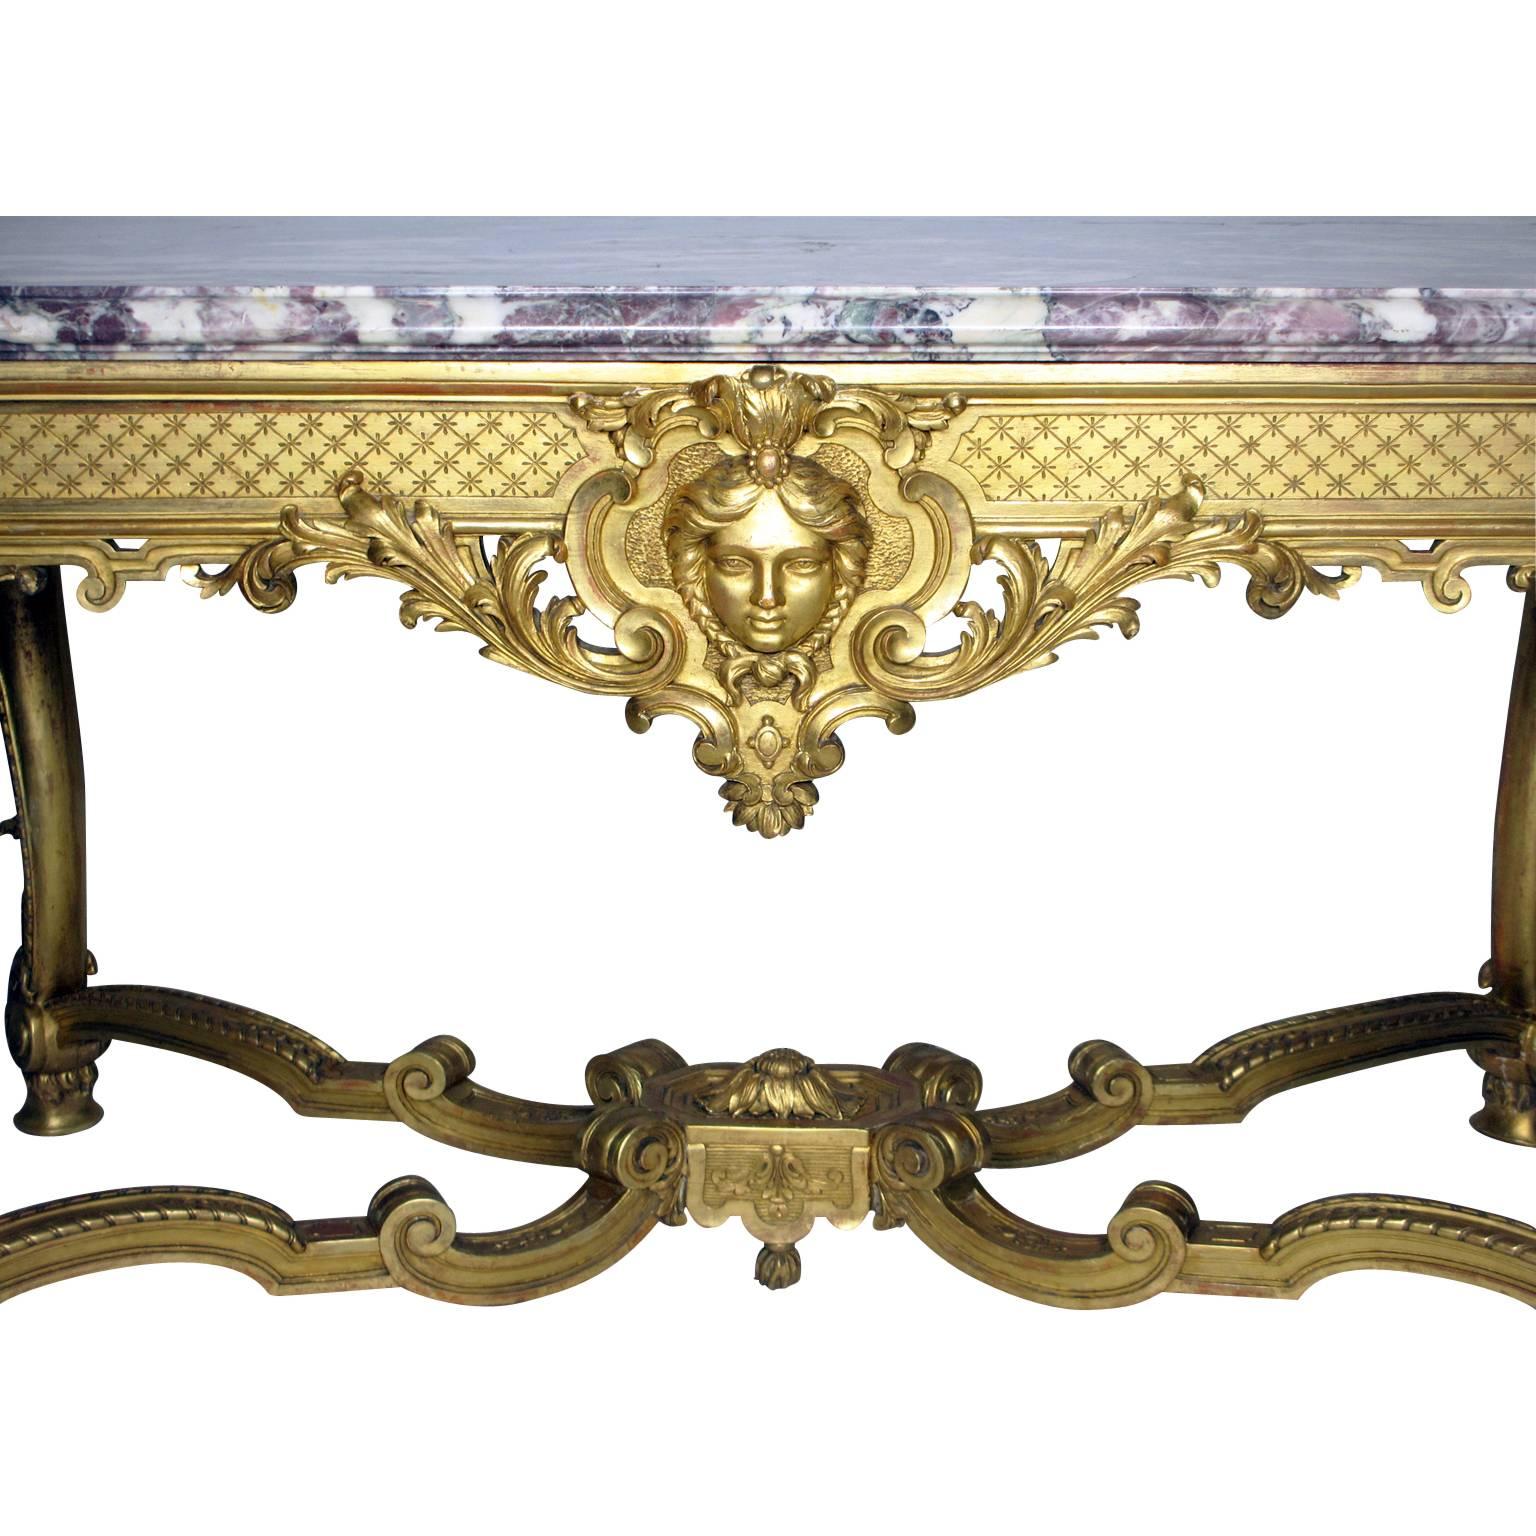 A very fine French 19th century Louis XV style giltwood carved figural center or hall table fitted with a Brêche violette marble top. The rectangular frame with four scrolled cabriole legs ending in hoof feet and conjoined with a center stretcher